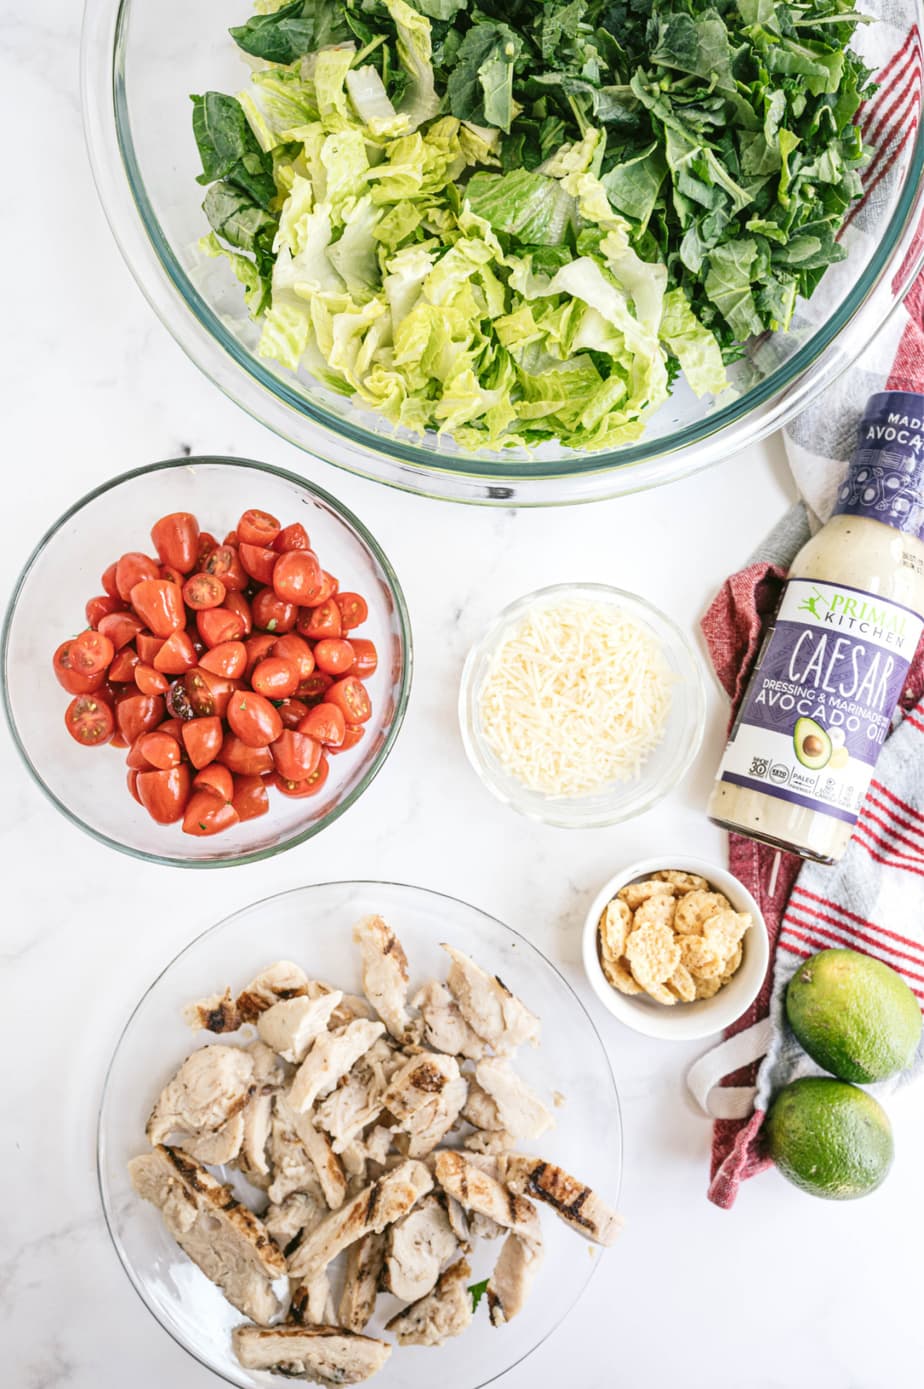 Overhead photo of ingredients in glass bowls - Greens, chopped tomatoes, diced grilled chicken, Parmesan, and Caesar dressing